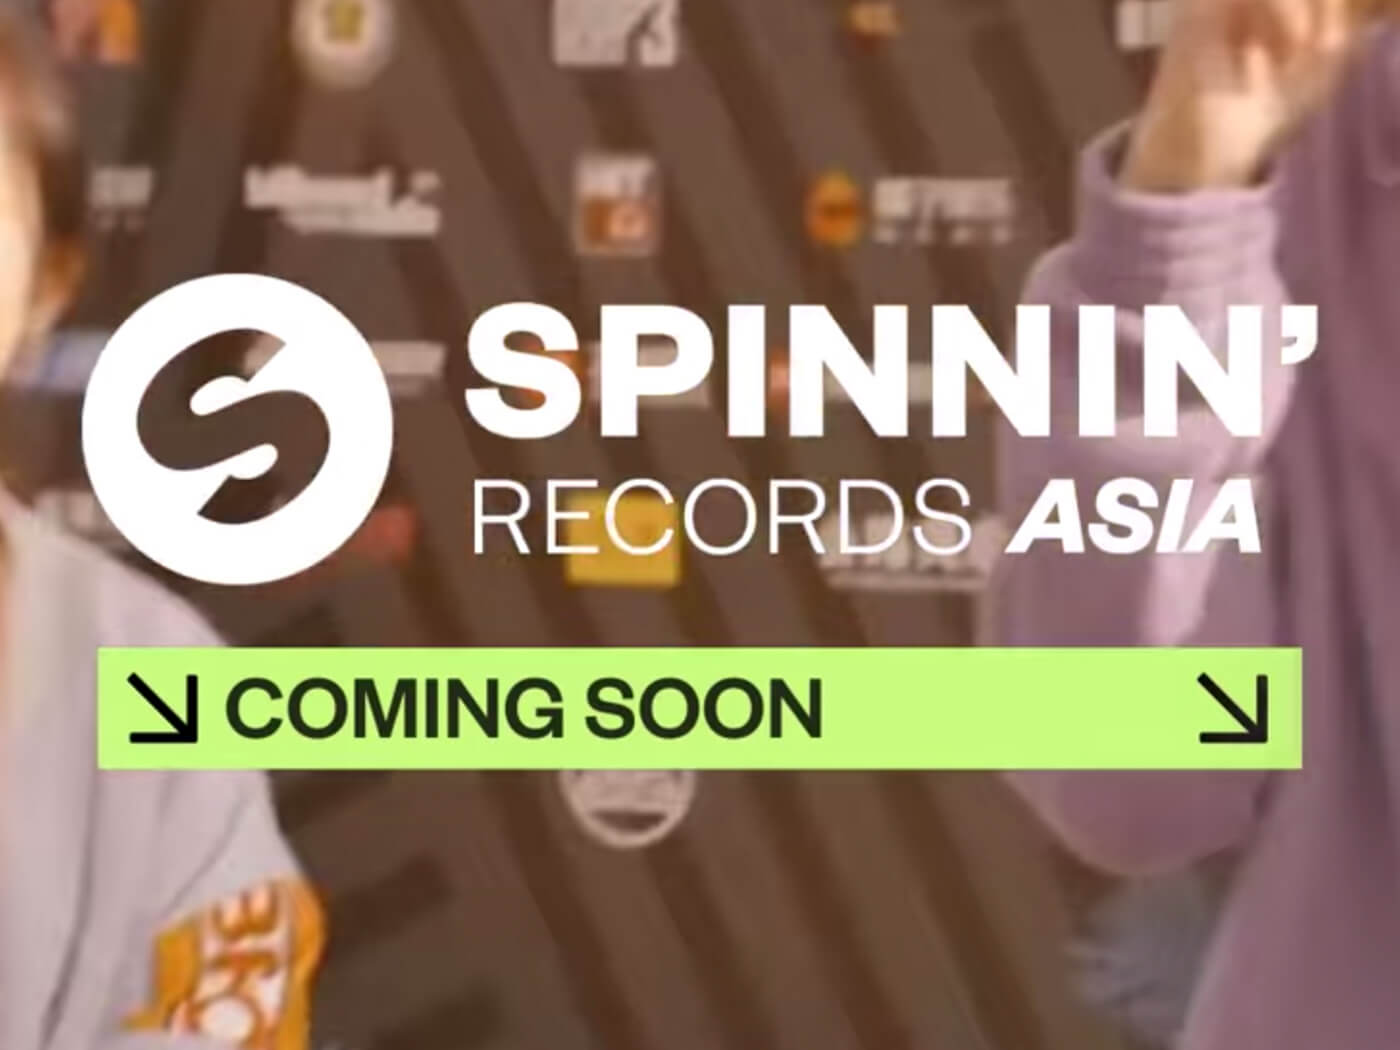 Spinnin' Records Asia